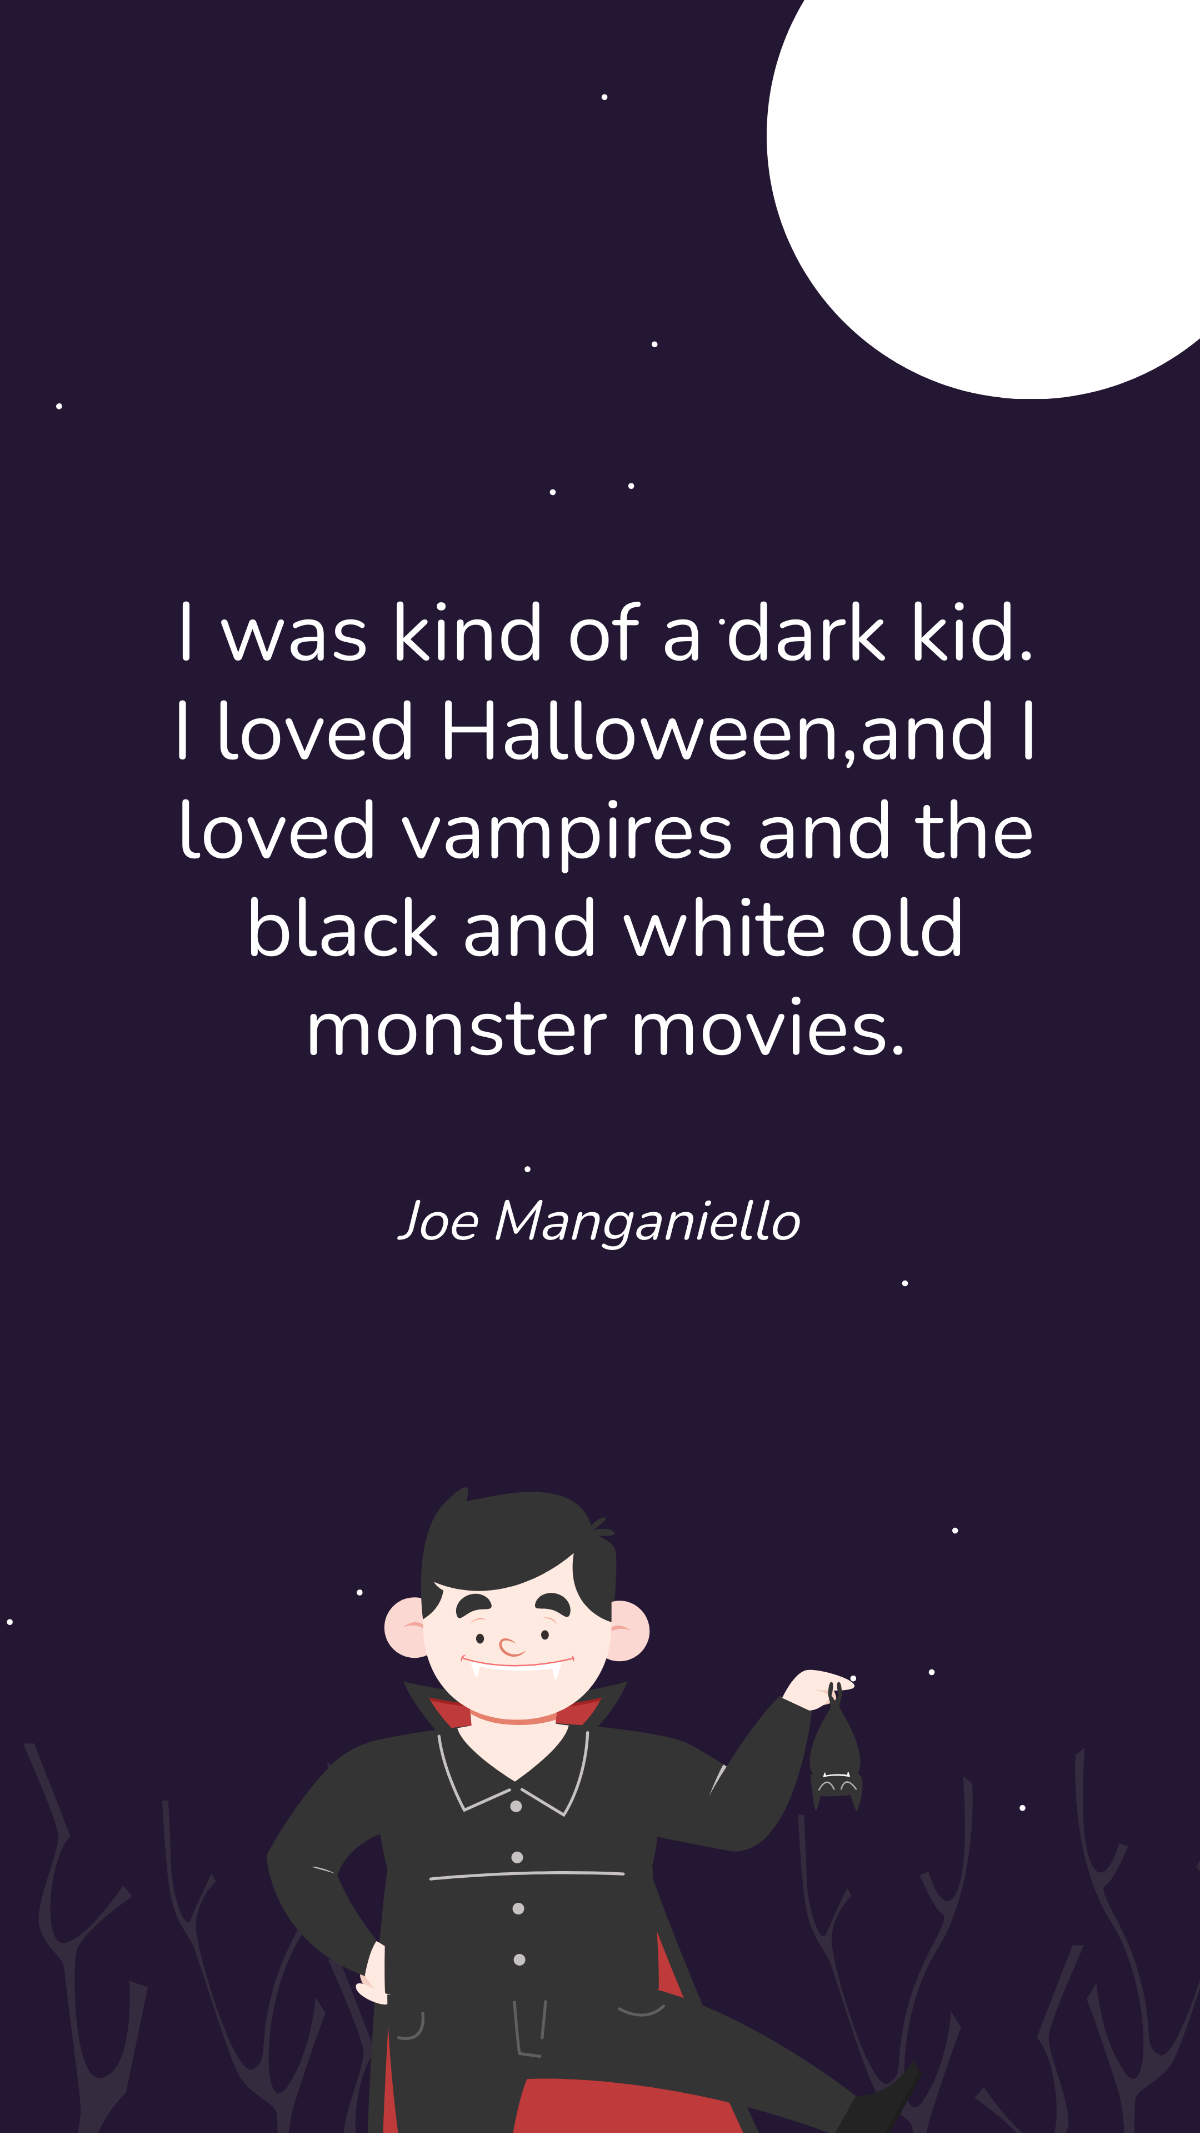 Joe Manganiello- I was kind of a dark kid. I loved Halloween, and I loved vampires and the black and white old monster movies. Template